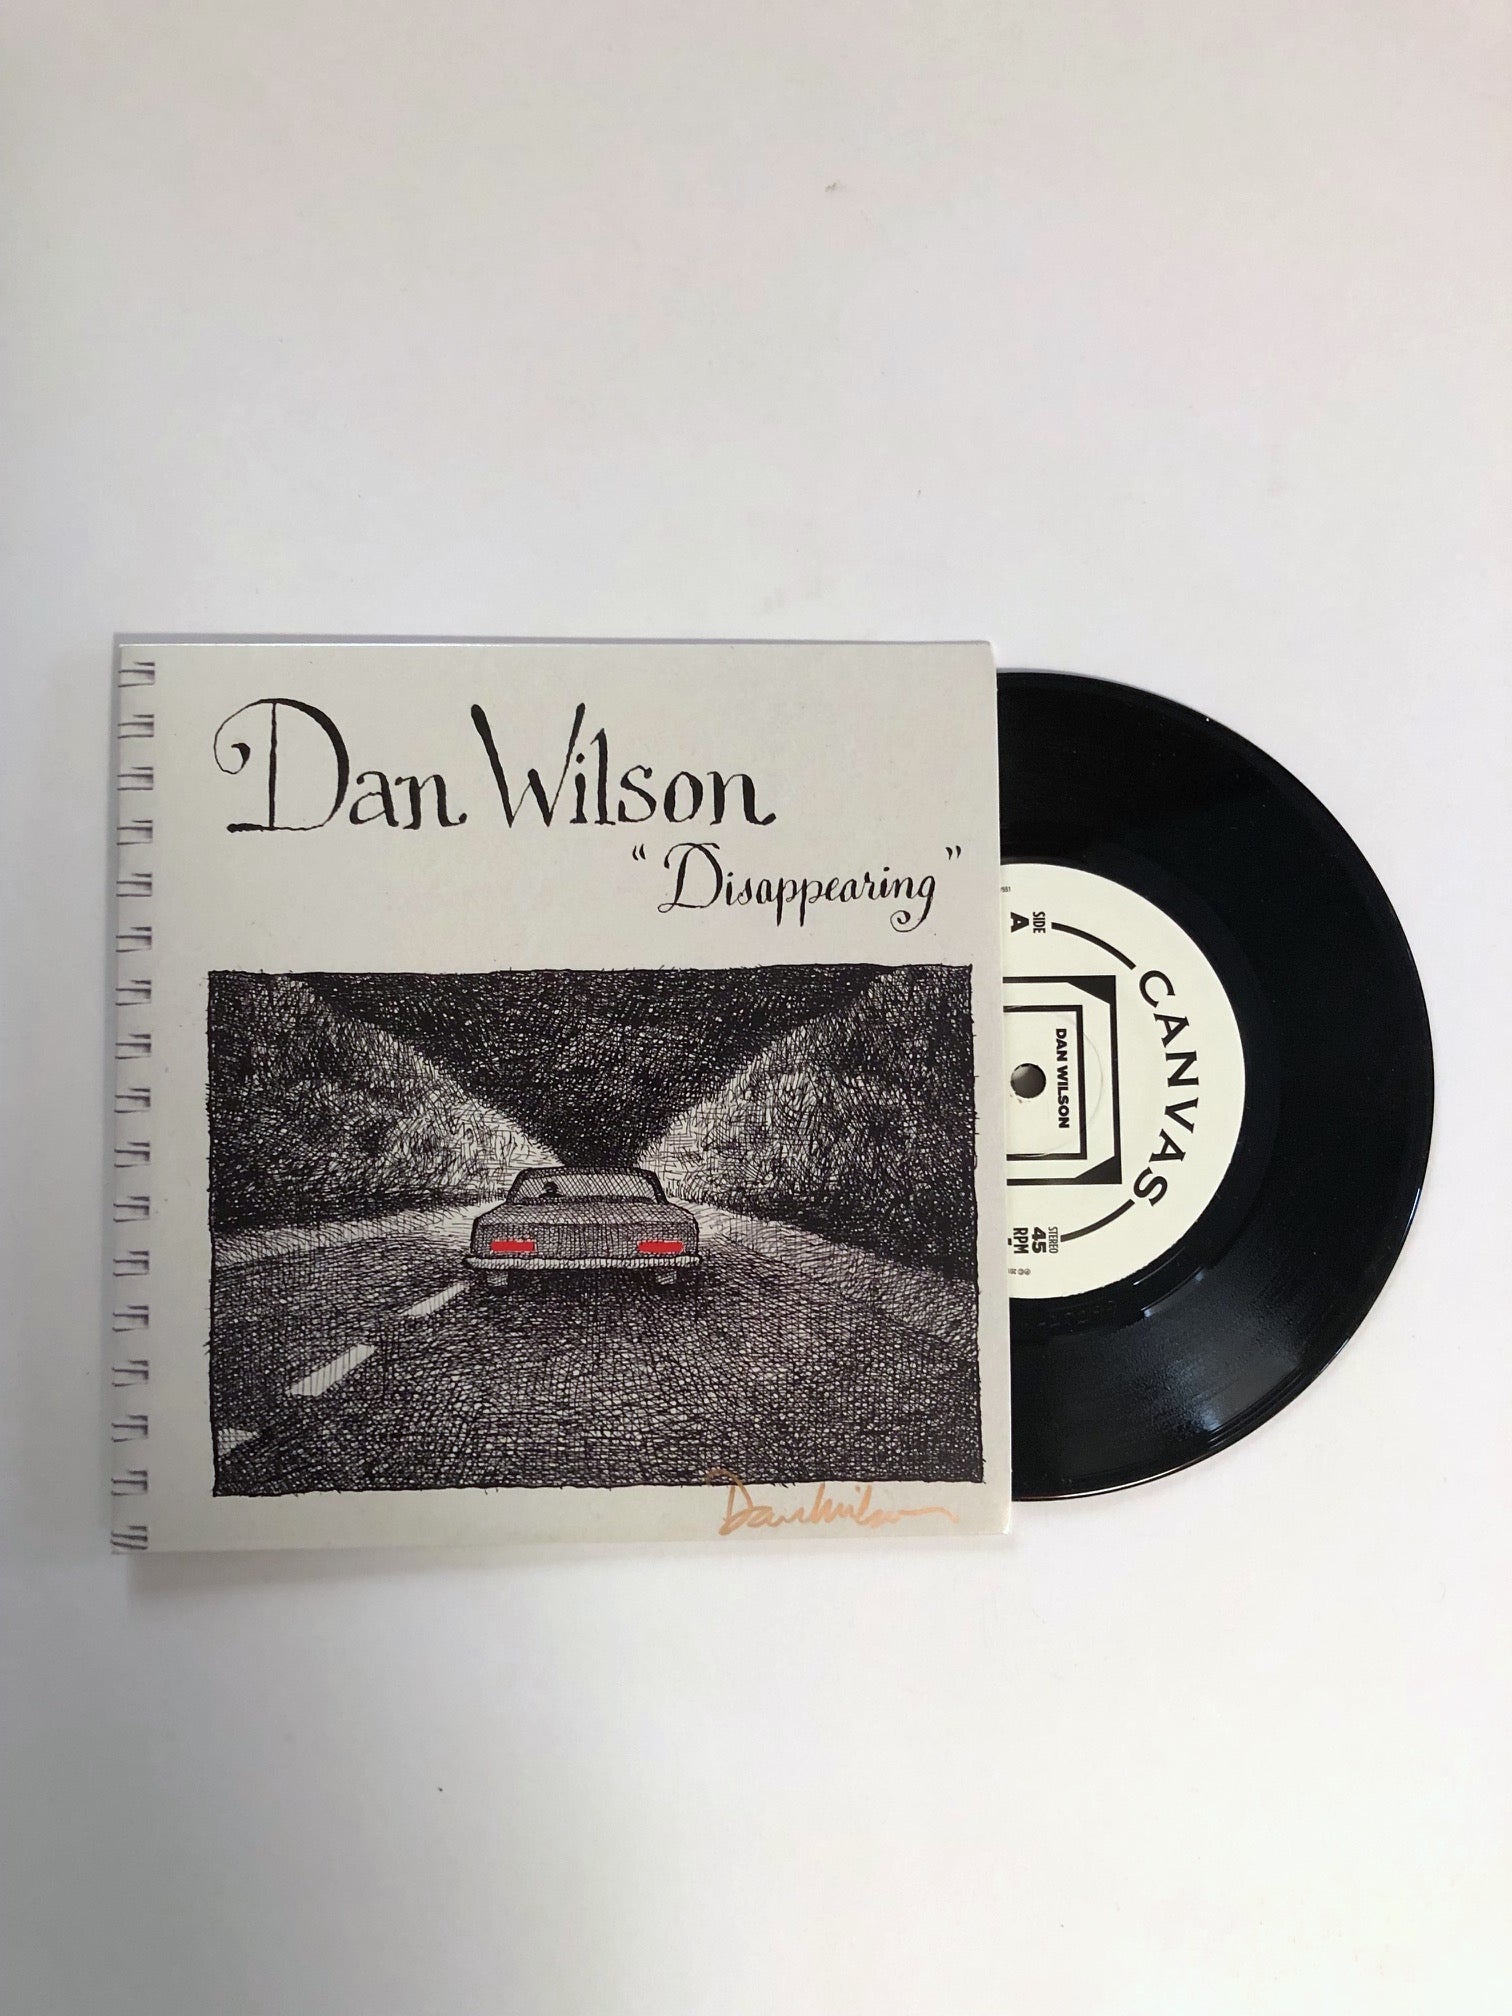 *NEW* Dan Wilson - Disappearing 7-Inch Vinyl (Autographed)